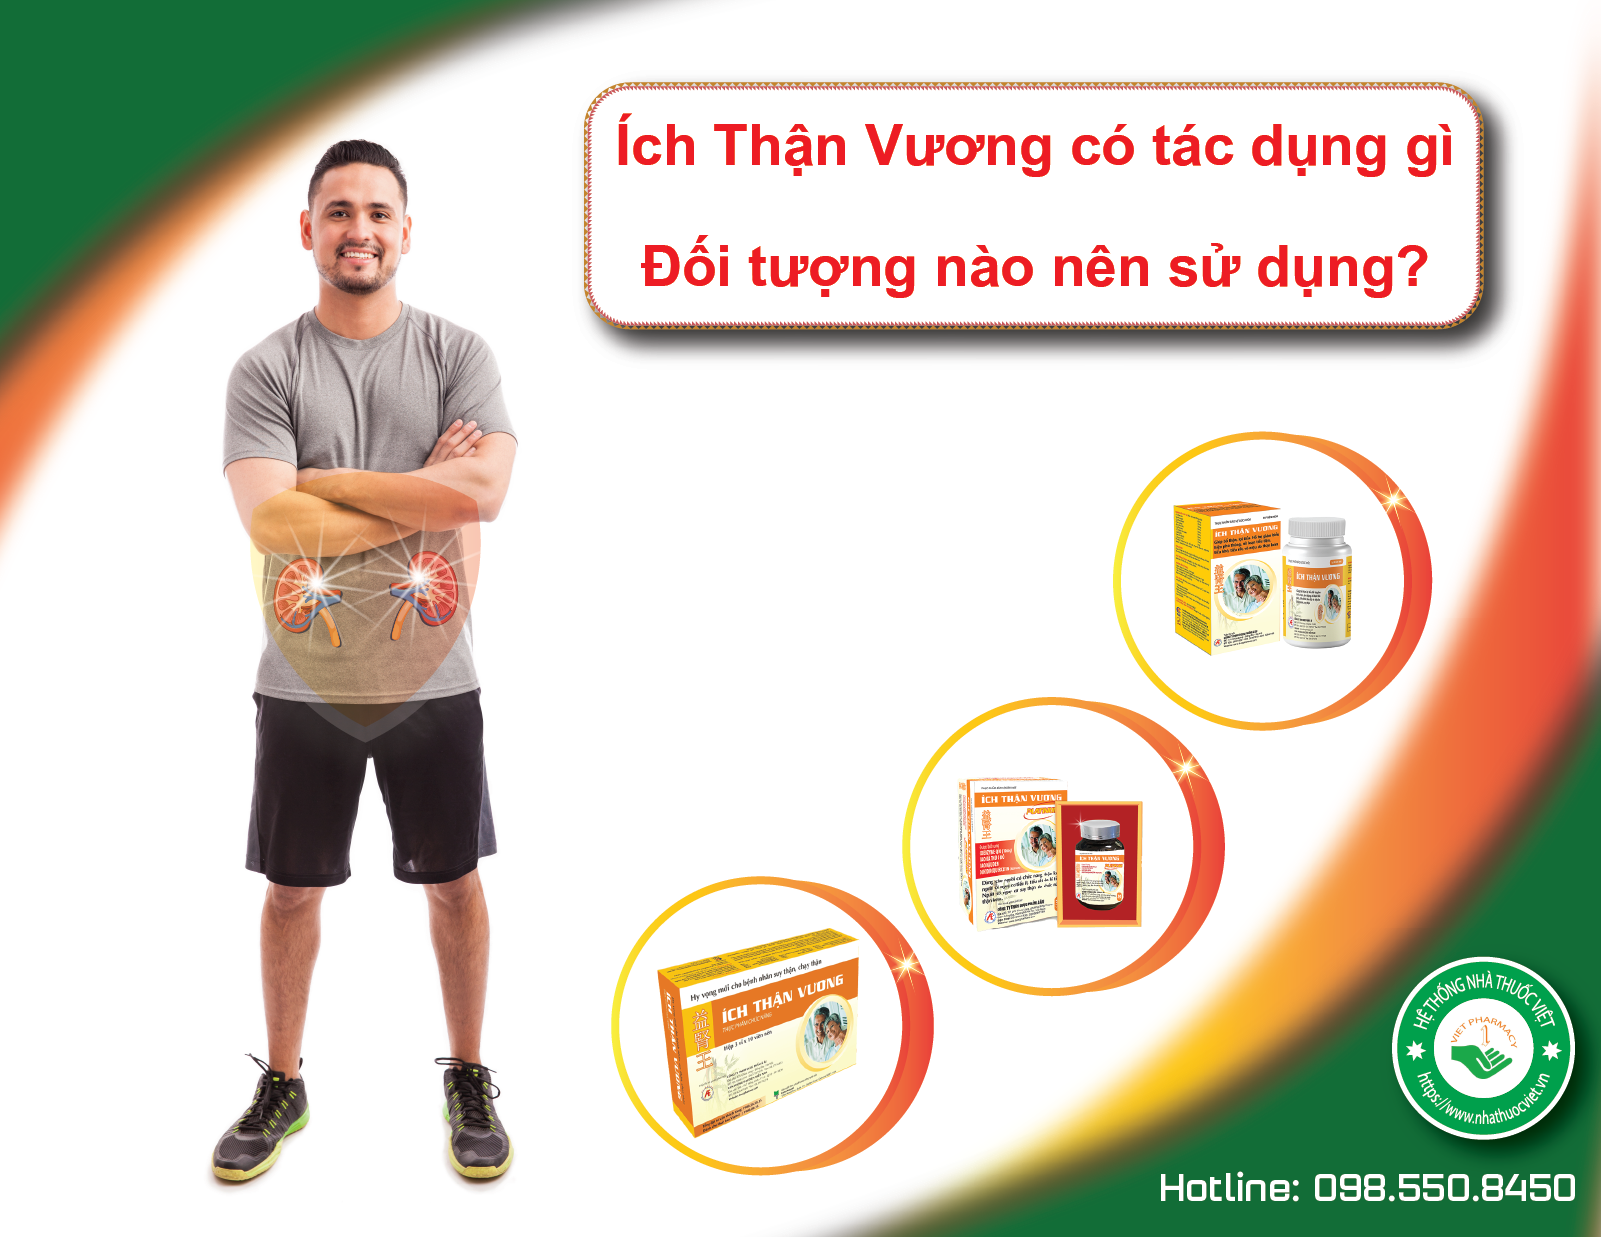 What are the main components of the Ích Thận Vương product and how do they benefit the human body?